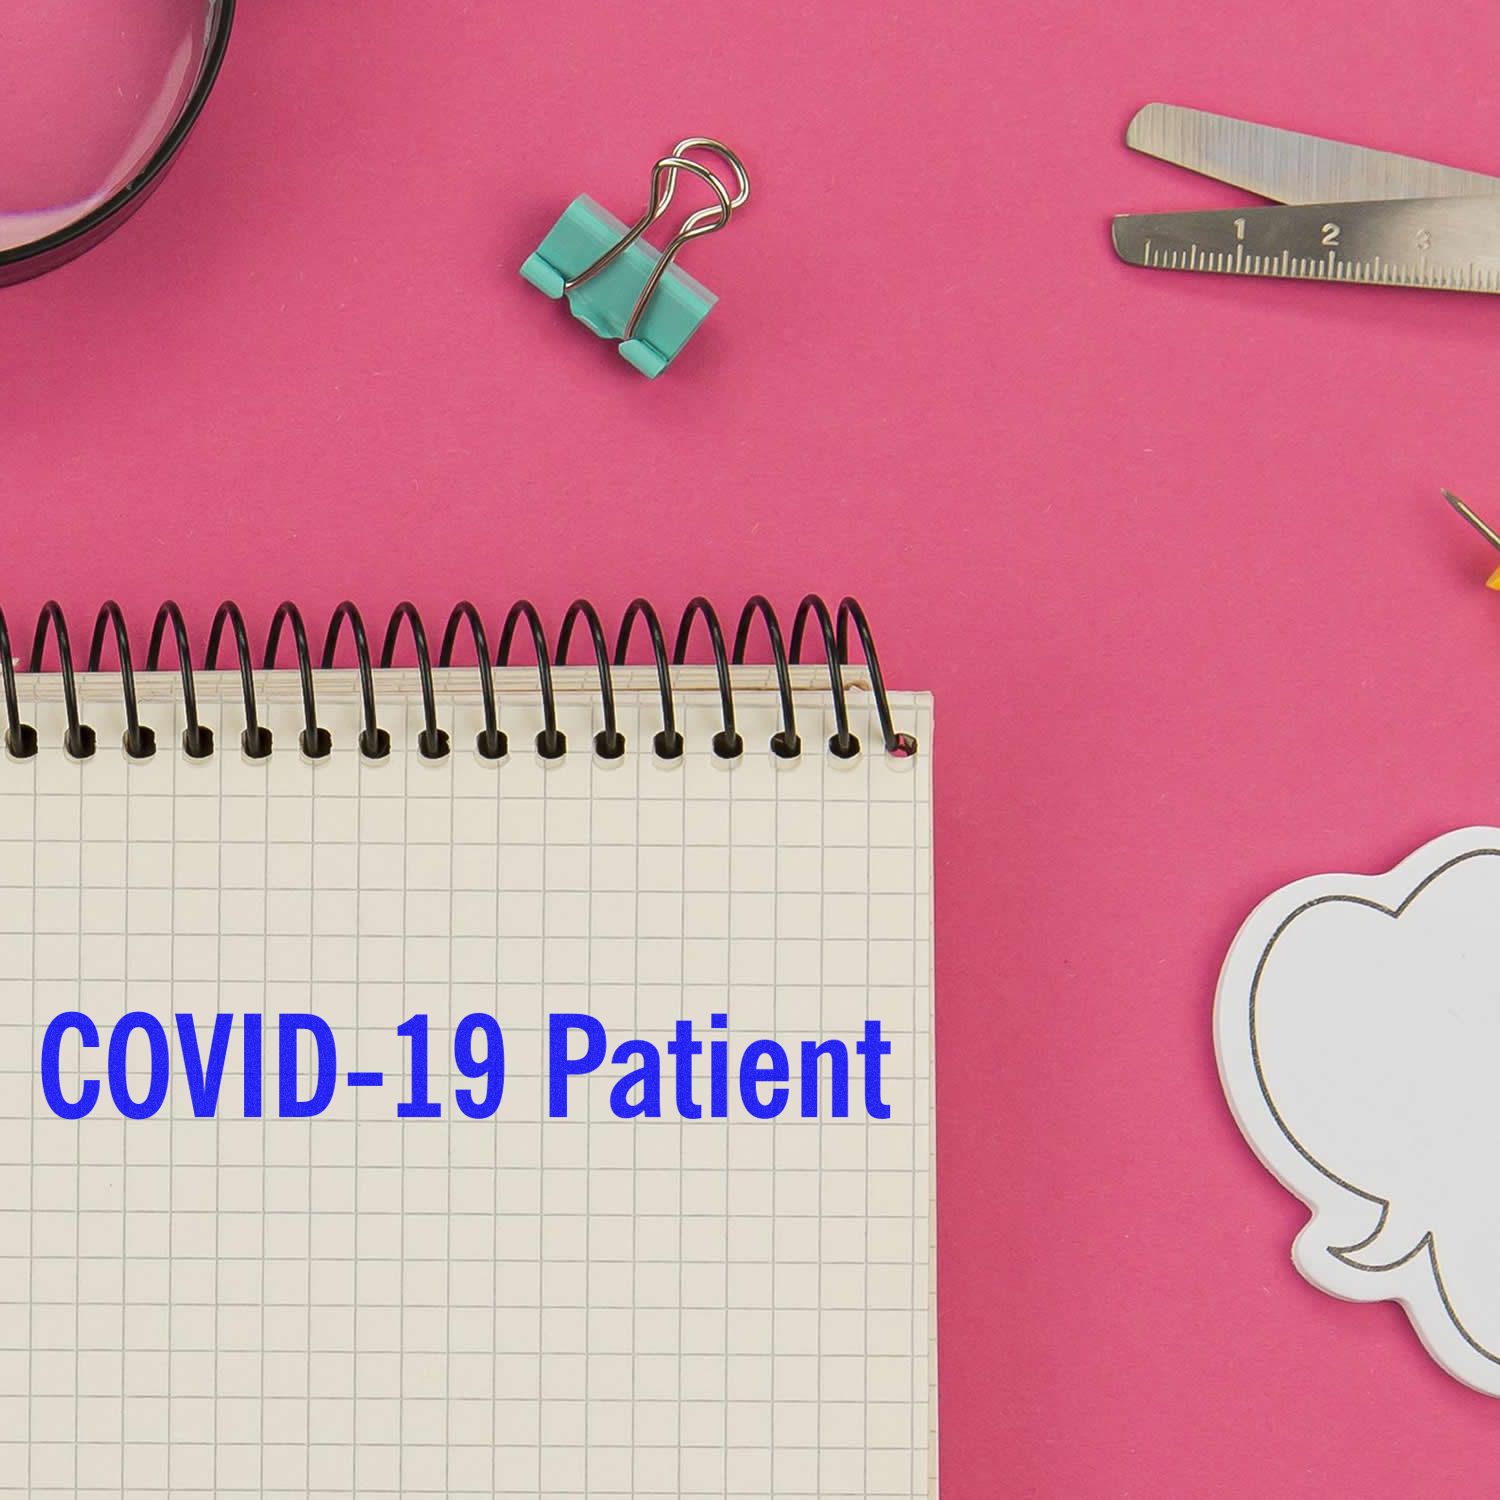 Covid-19 Patient Rubber Stamp In Use Photo